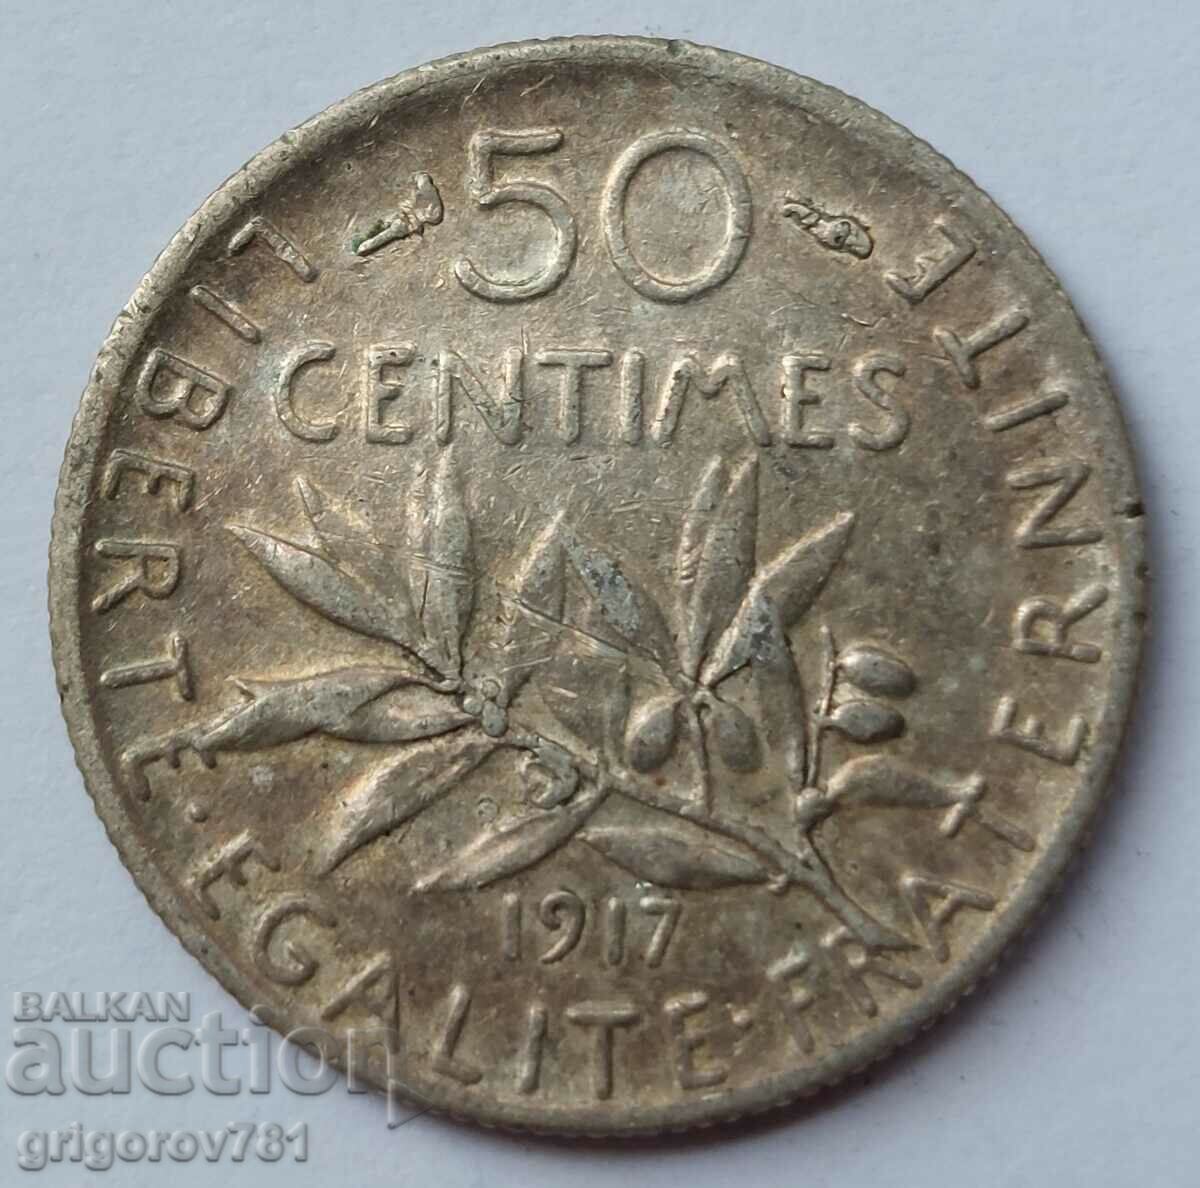 50 centimes silver France 1917 - silver coin №40